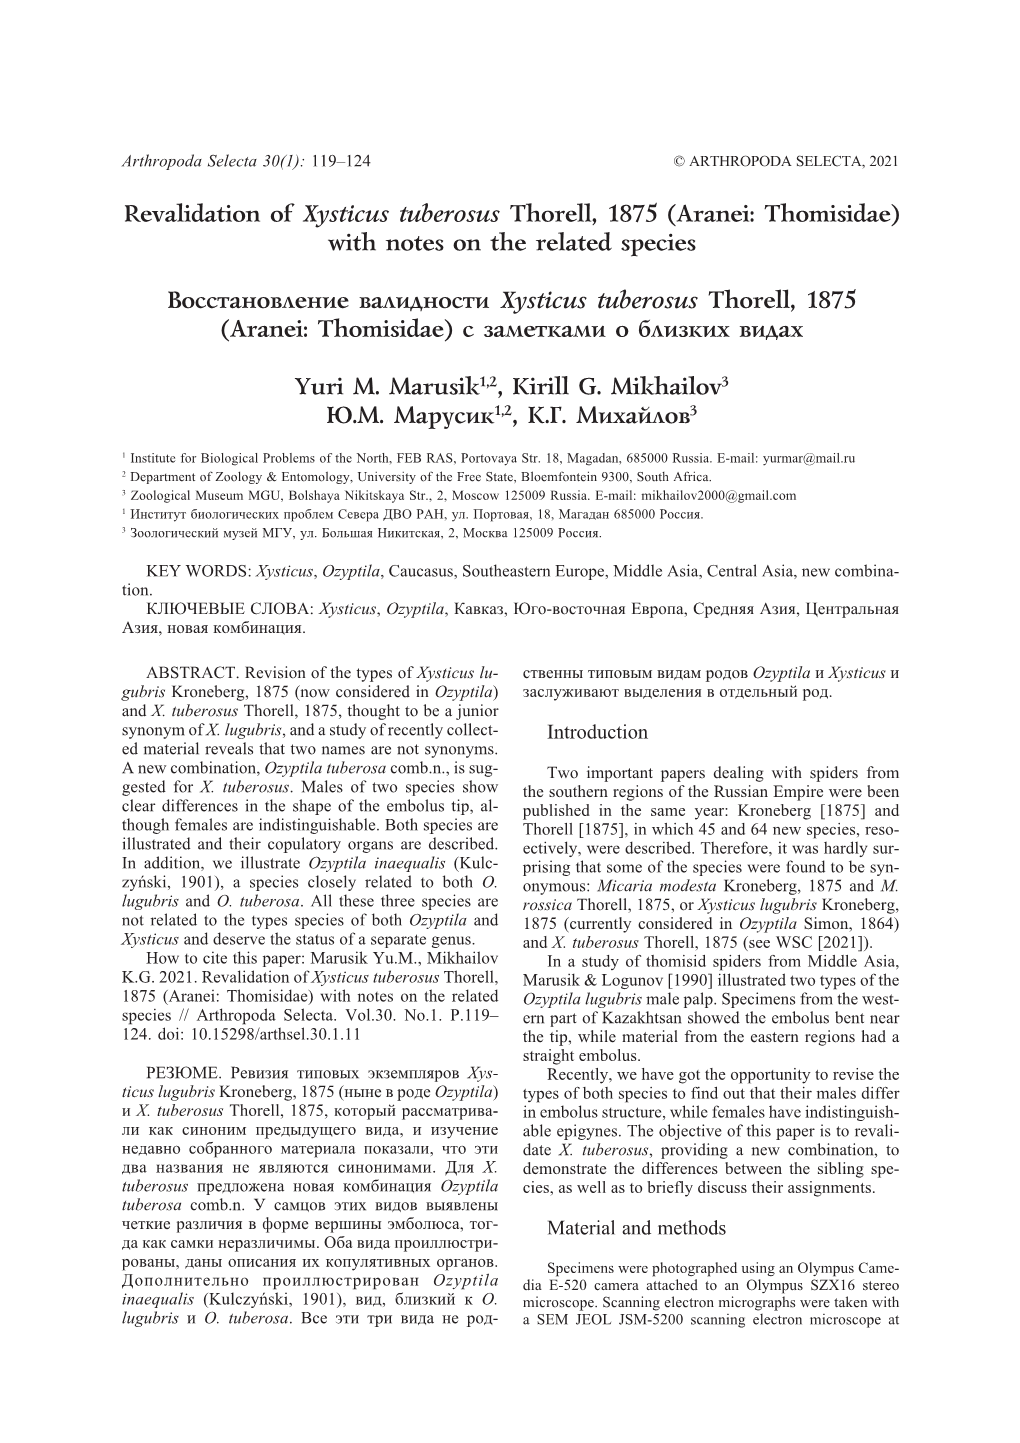 Revalidation of Xysticus Tuberosus Thorell, 1875 (Aranei: Thomisidae) with Notes on the Related Species